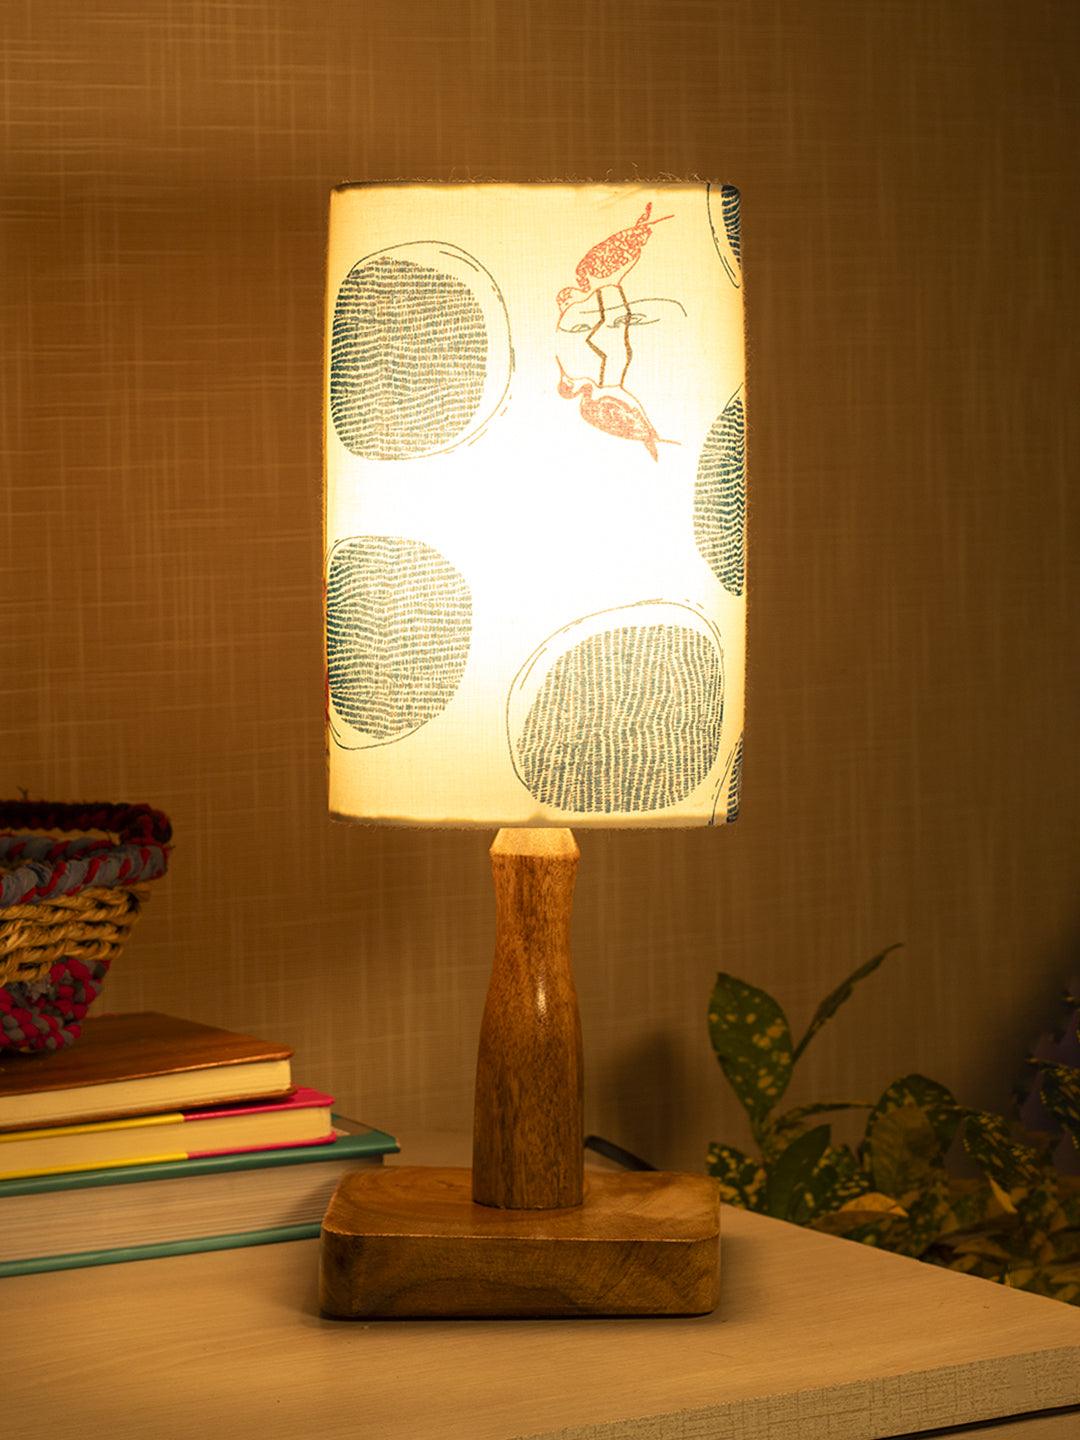 Wooden Table Lamp With Bird Print Shade - MARKET 99